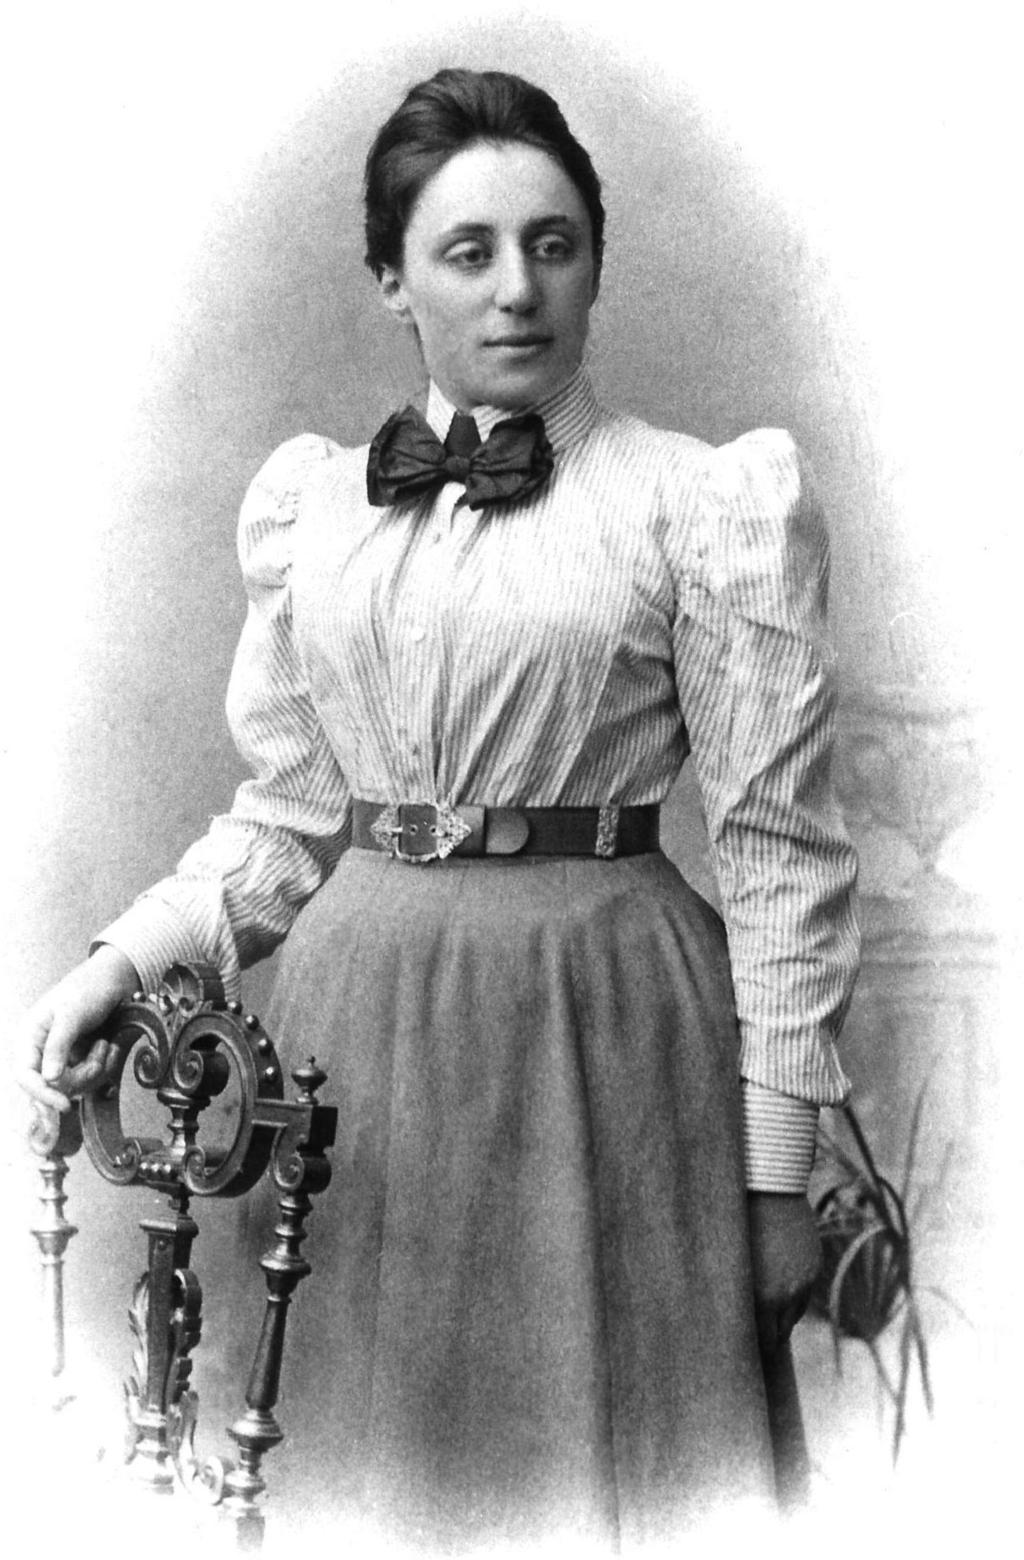 Emmy Noether Born on 23 March 1882 in Erlagen, Germany Got her education in mathematics at the University of Erlagen Taught there for 7 years, moved to University of